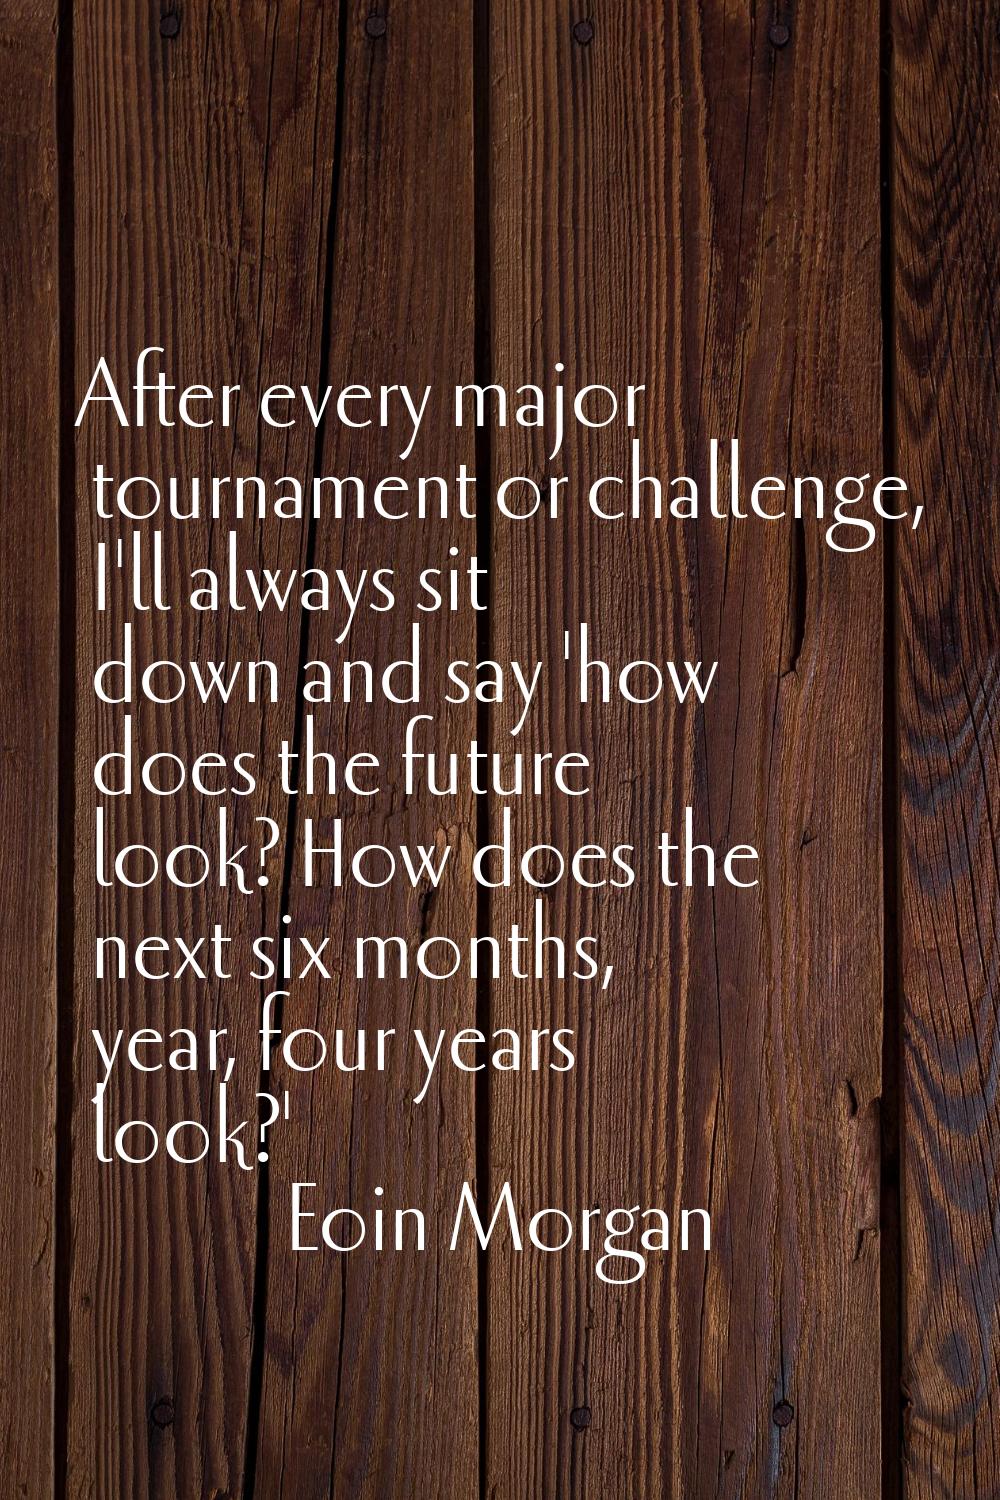 After every major tournament or challenge, I'll always sit down and say 'how does the future look? 